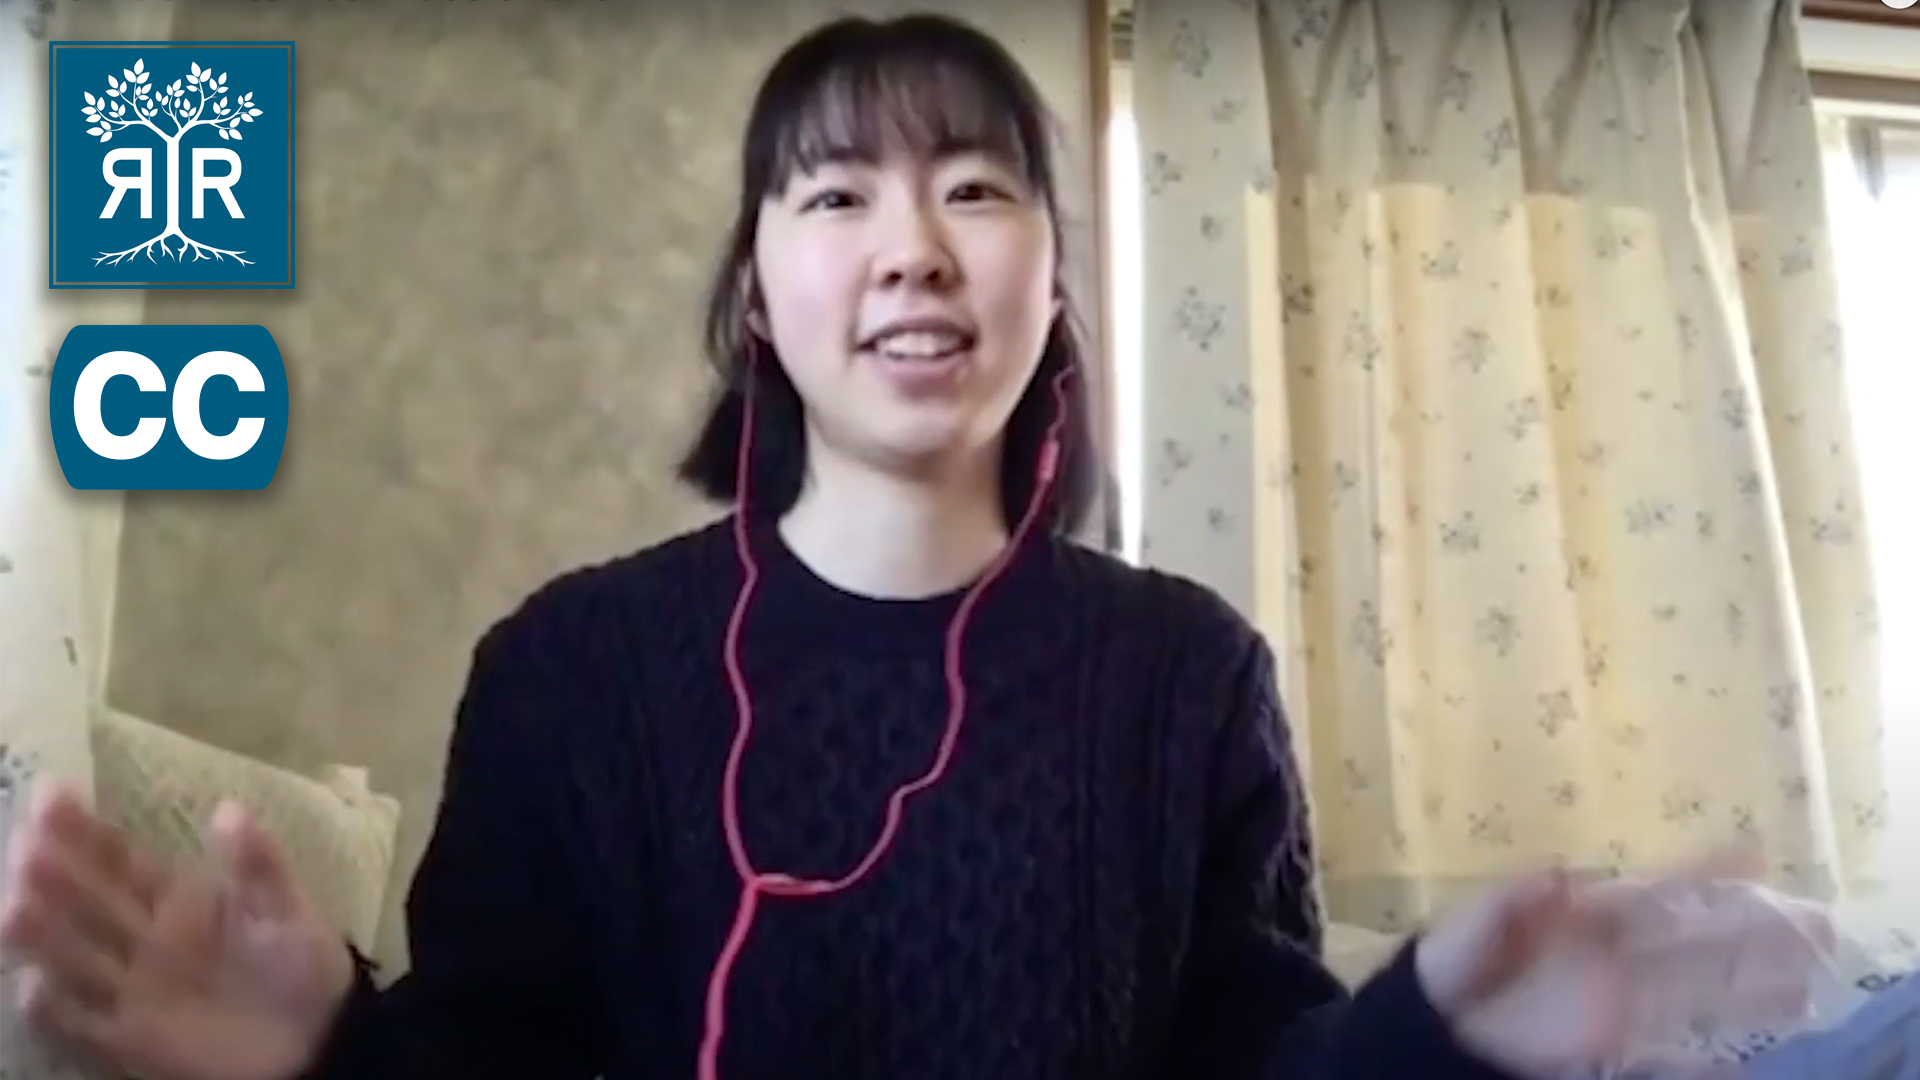 Thumbnail that shows Ayaka, a Japanese person in a room speaking to camera. The RiR badge and closed caption icon are to the left.